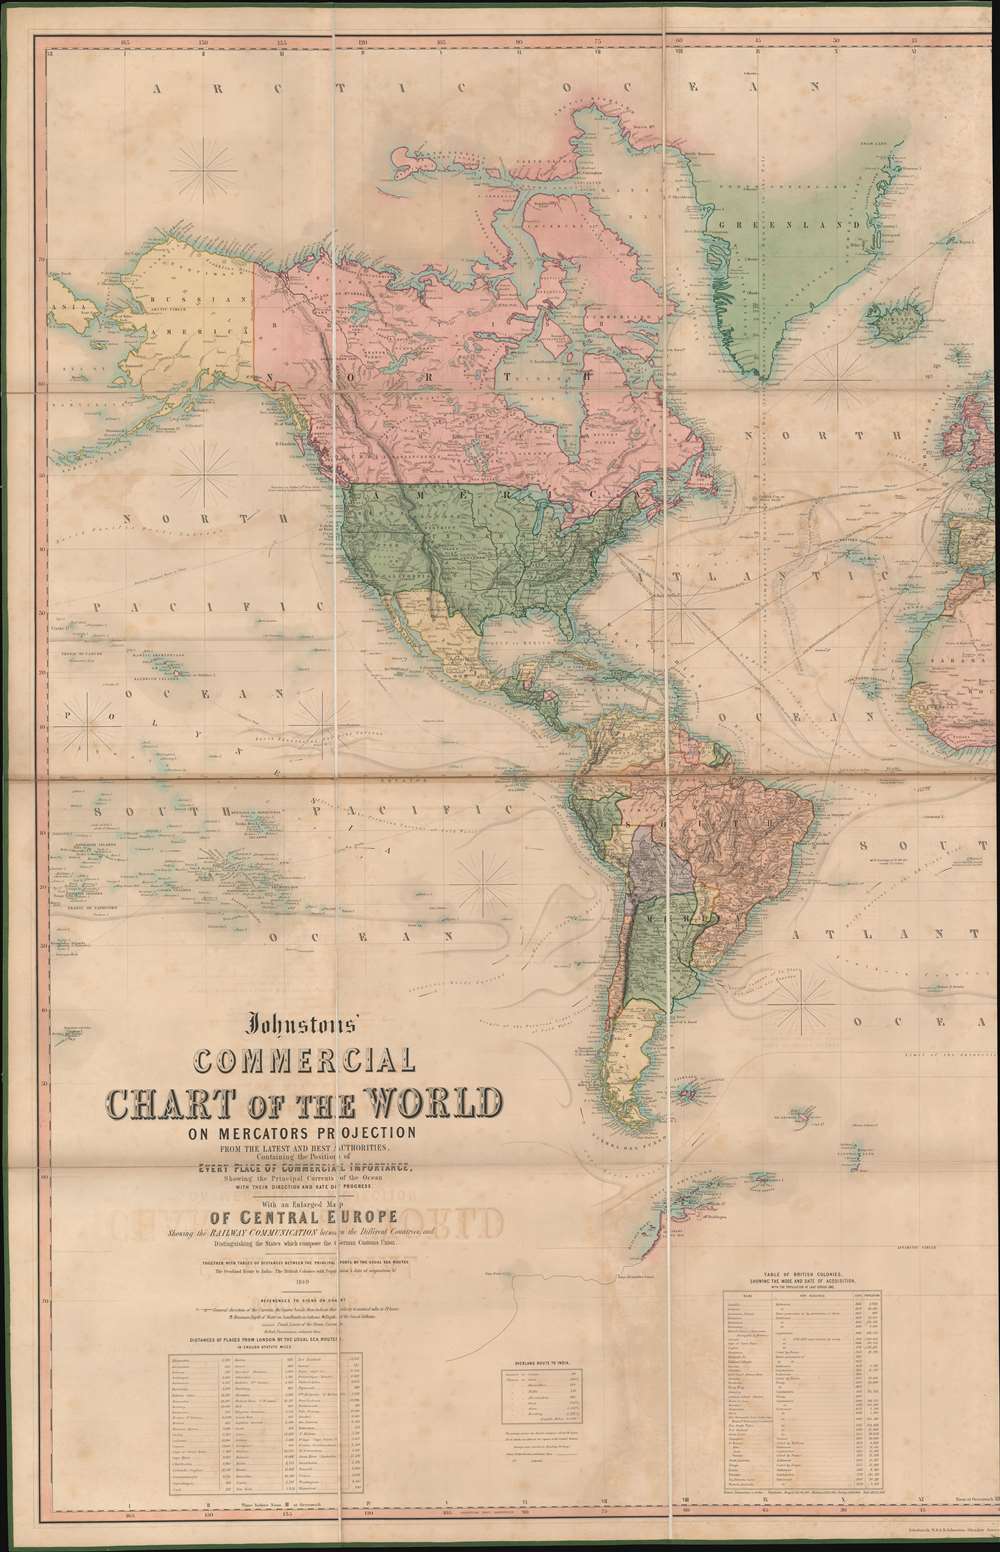 Johnstons' Commercial Chart of the World on Mercators Projection from the latest and Best Authorities Containing the Position of Every Place of Commercial Importance, Shhowing the Princial Currents of hte Ocean with their Direction and Rate of Progress.  With an Enlarged Map of Central Europe Showing the Railway Communication between the Different Countries, and Distinguishing the States which compose the German Customs Union. - Alternate View 2